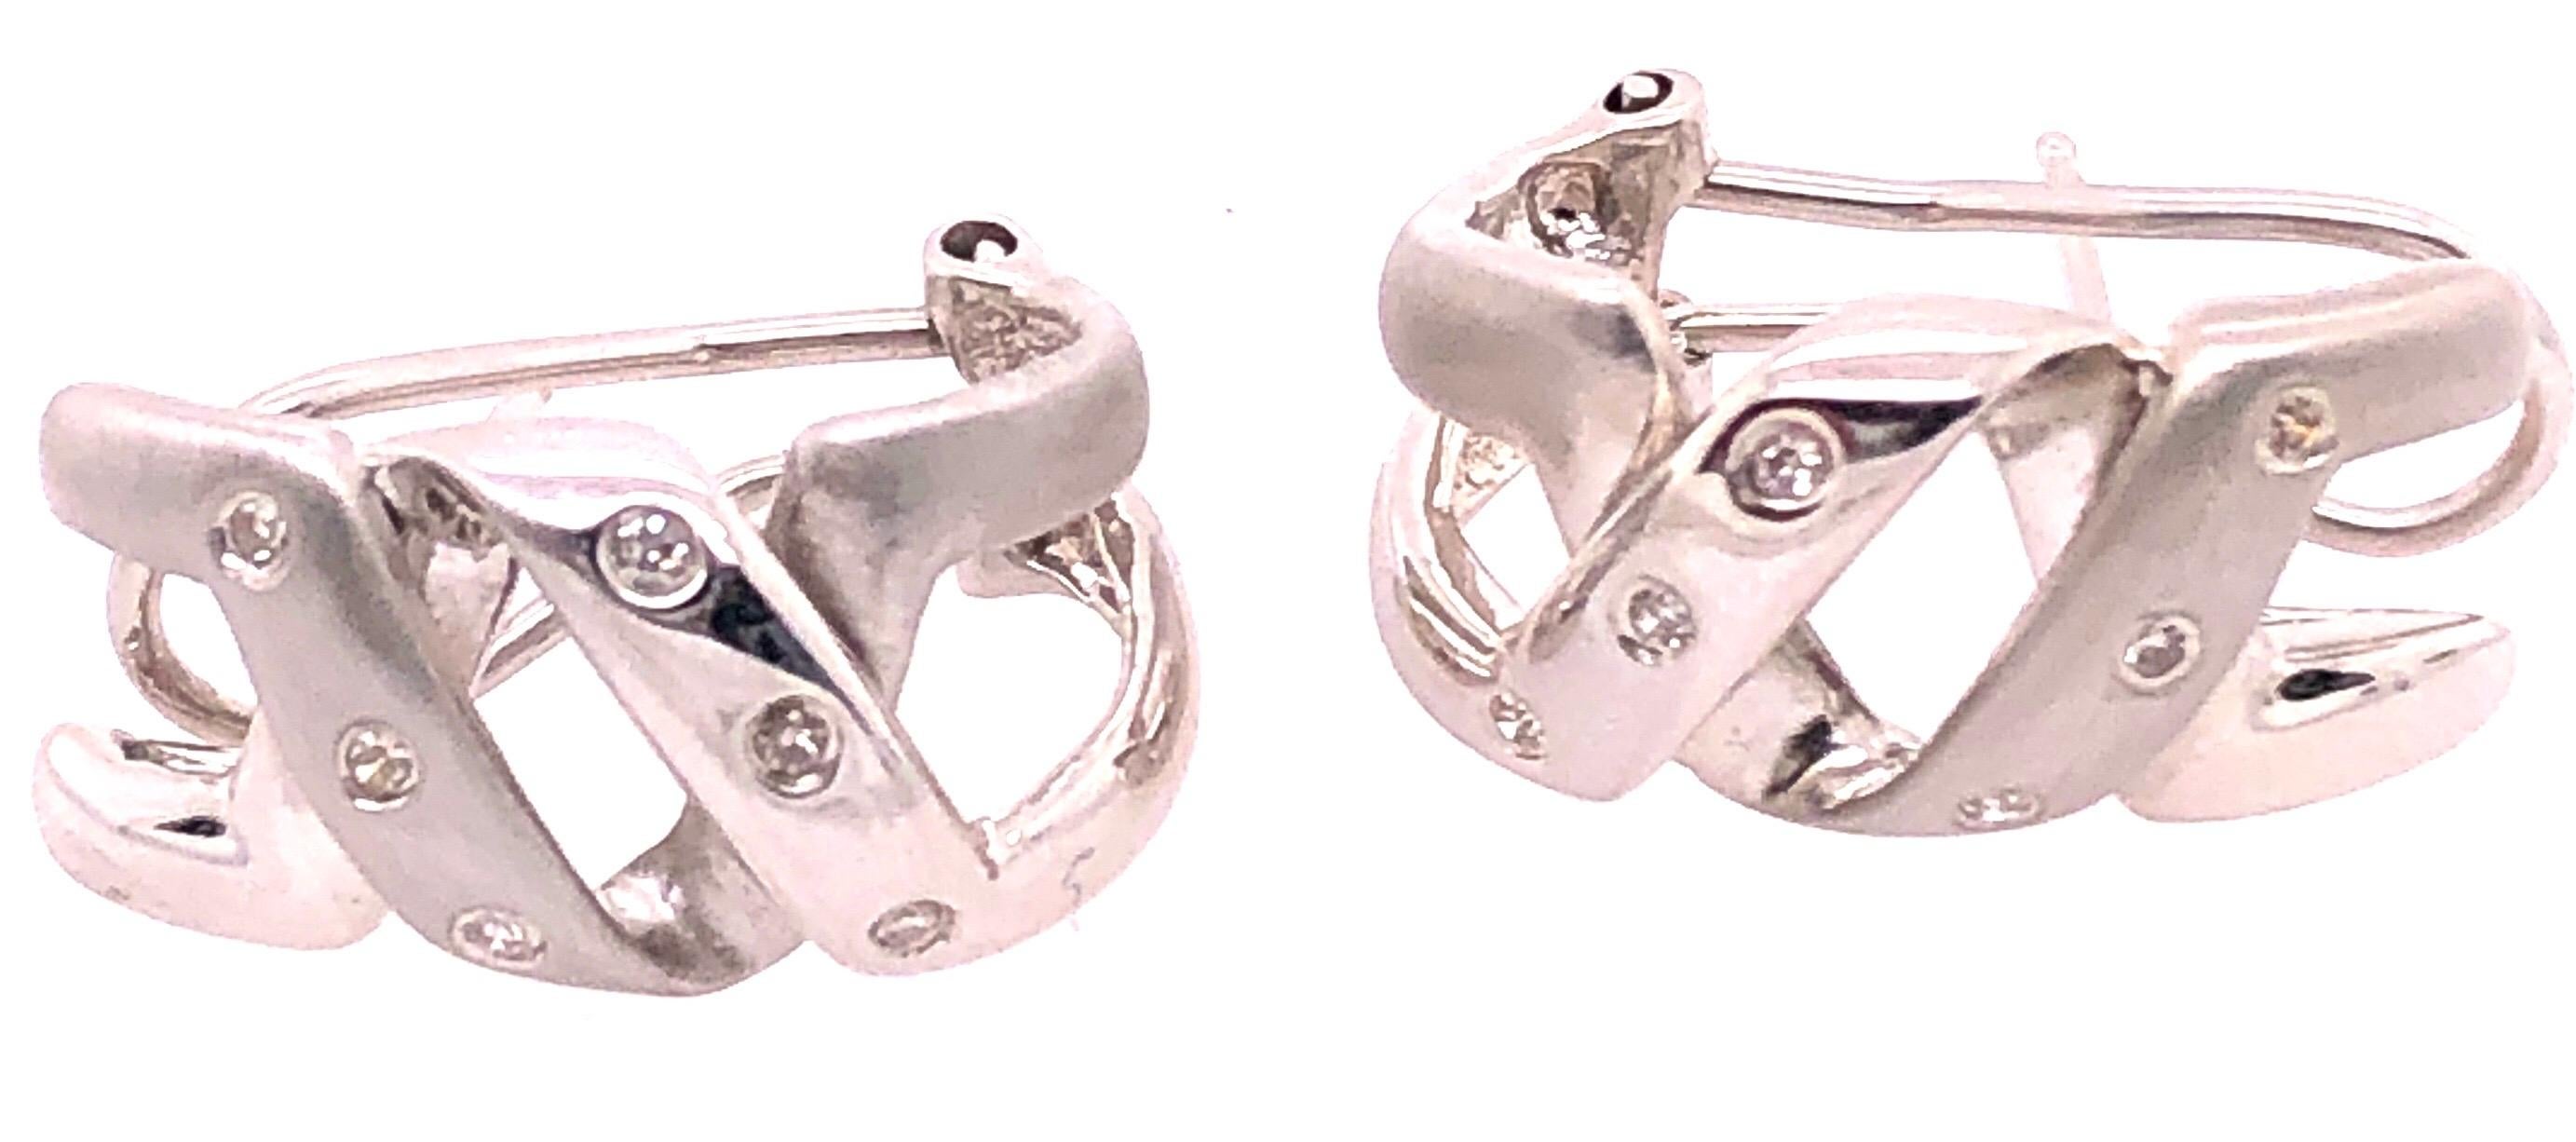 14 Karat White Gold French Back Fashion Earrings with Round Diamonds 0.25 Total Diamond Weight.
6.73 grams total weight.